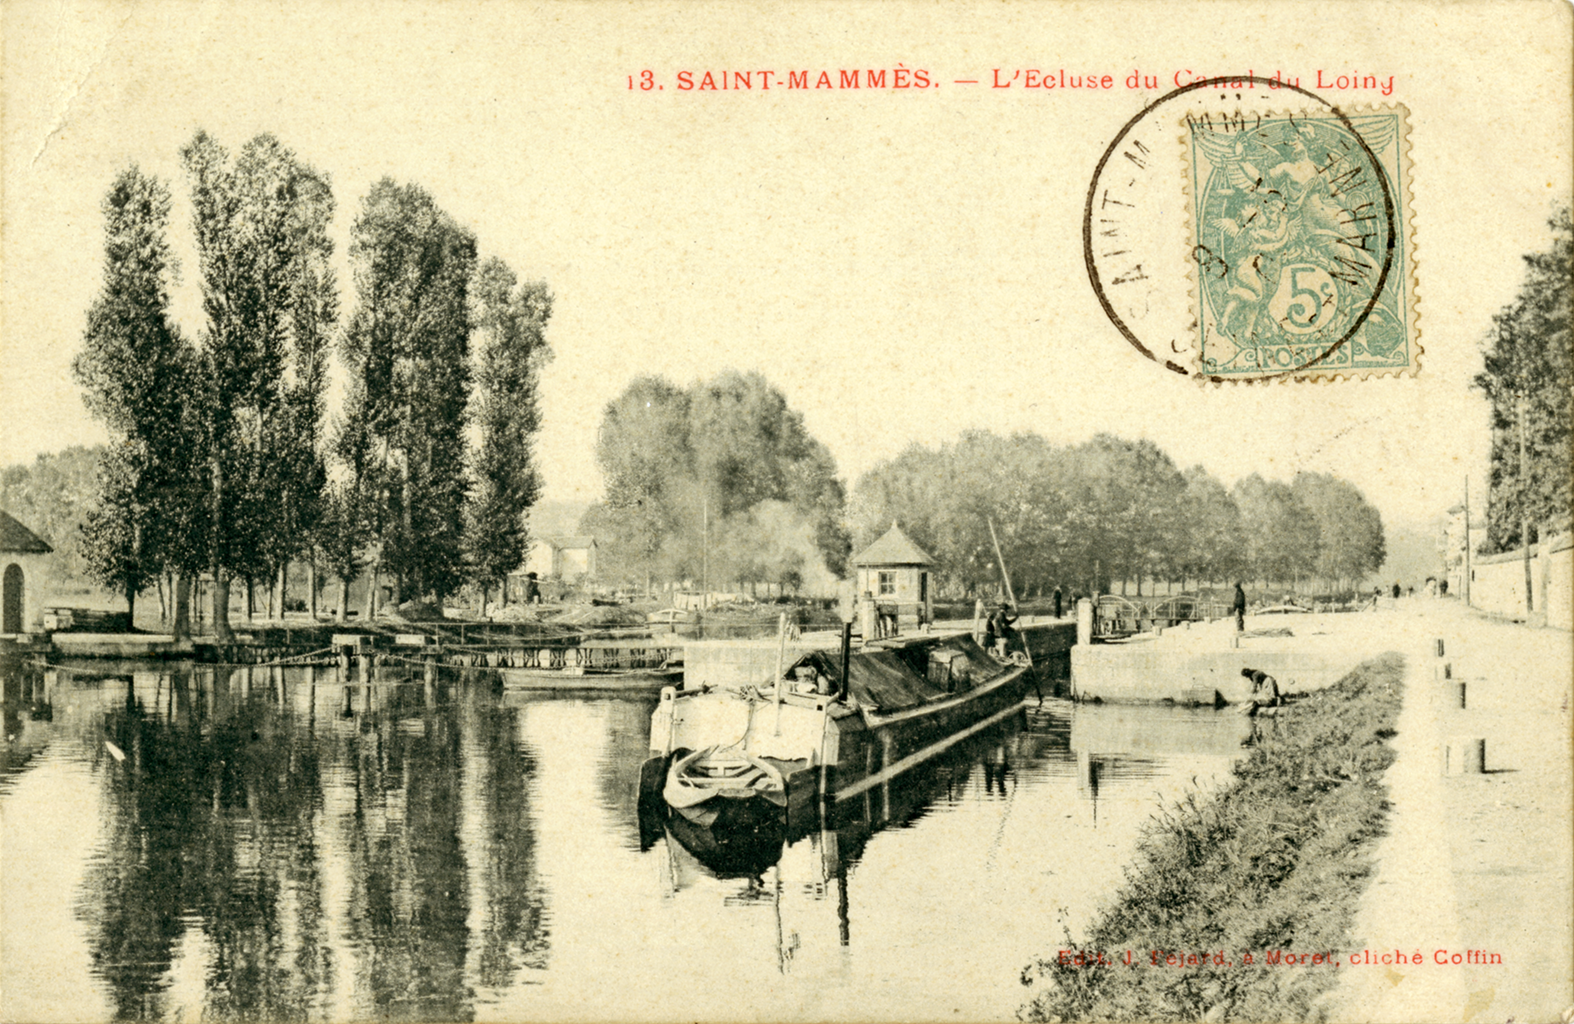 A black and white image of a dock on a river lined with trees and a walking trail. The path is near a small grass shore. A boat with boxes and tarps waits at the dock. On the image is a green stamp, and above it writes &ldquo;3. Saint-Mammès. - L’Ecluse du Canal du Loing&rdquo;